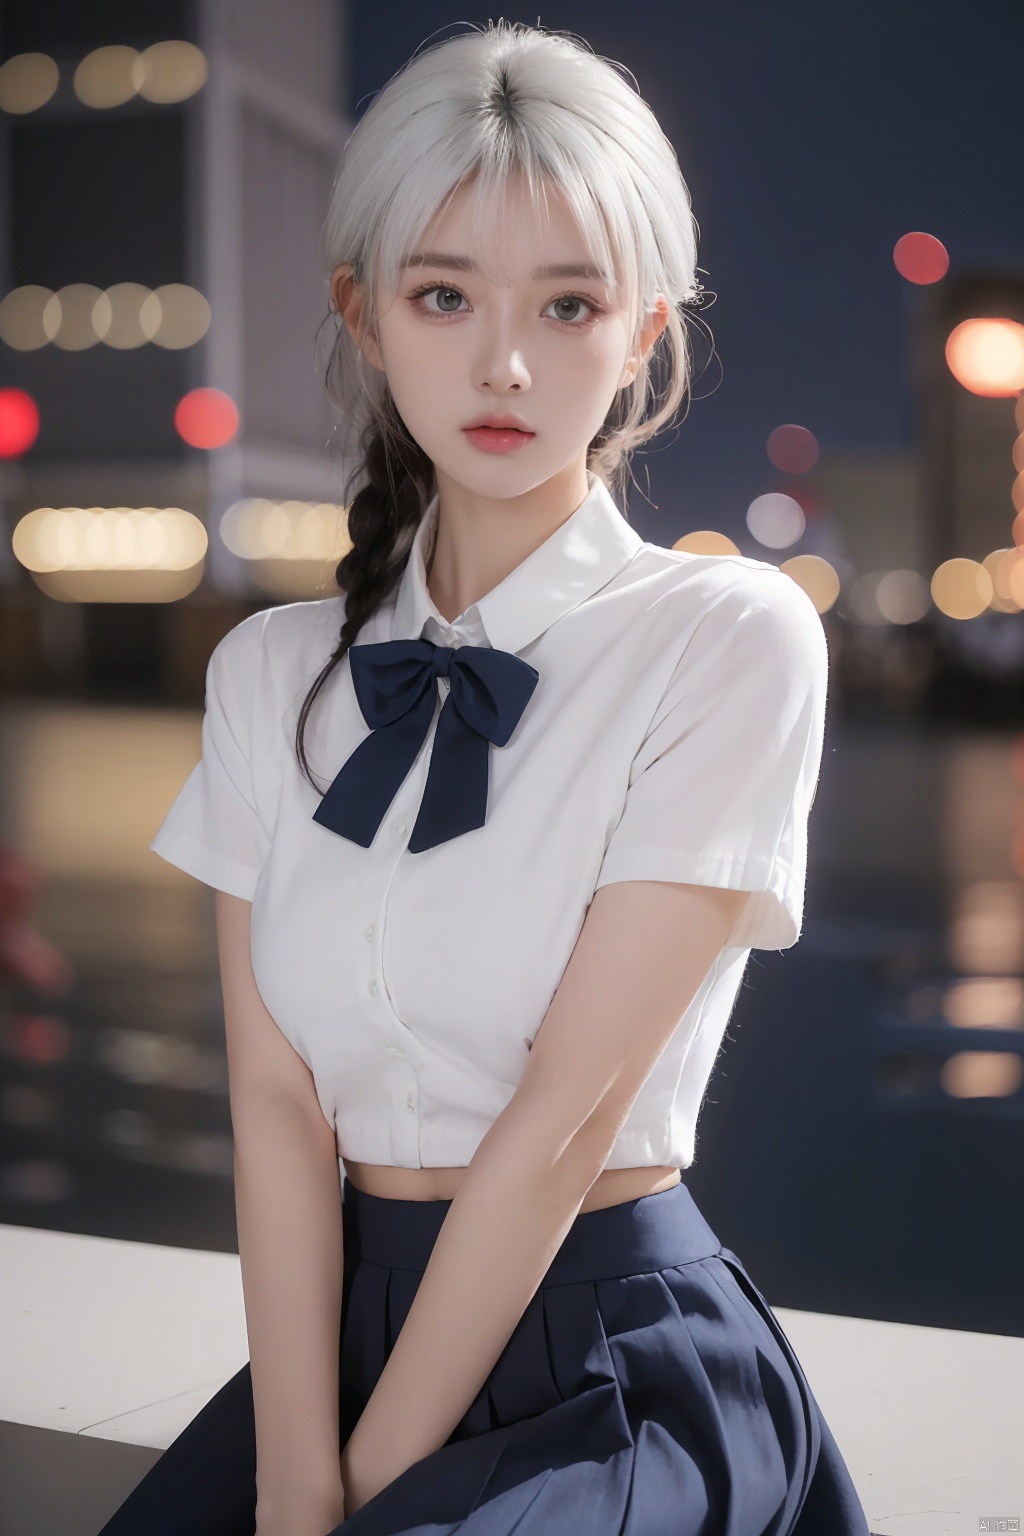  1girl,(8k, RAW photo, best quality, masterpiece:1.3),(realistic,photo-realistic:1.37),(night),(looking at viewer:1.331),(white hair),posing,Tokyo street,nightcityscape, , cyberpunk city,soft light,1girl,extremely beautiful face,bust,put down hands,Random hairstyle,Random expression,big eyes, ,lower abdomen,(short-sleeved 
JK_shirt),JK_style,(dark blue JK_skirt) ,(bow JK_tie),mix4, an extremely delicate and beautiful girl, depth of field, blurry background, blurry foreground, delicate, beautiful, beautiful face, beautiful eyes, beautiful girl, delicate face, delicate girl, 8k wallpaper,(best quality:1.12),(detailed:1.12),(intricate:1.12),(ultra-detailed:1.12),(highres:1.12), hyper detailed,ultra-detailed, high resolution illustration, colorful, 8k wallpaper, highres, Cinematic light, ray tracing, (8k, RAW photo, best quality, masterpiece, ultra highres, ultra detailed:1.2), (realistic, photo-realistic:), HUBG_Beauty_Girl